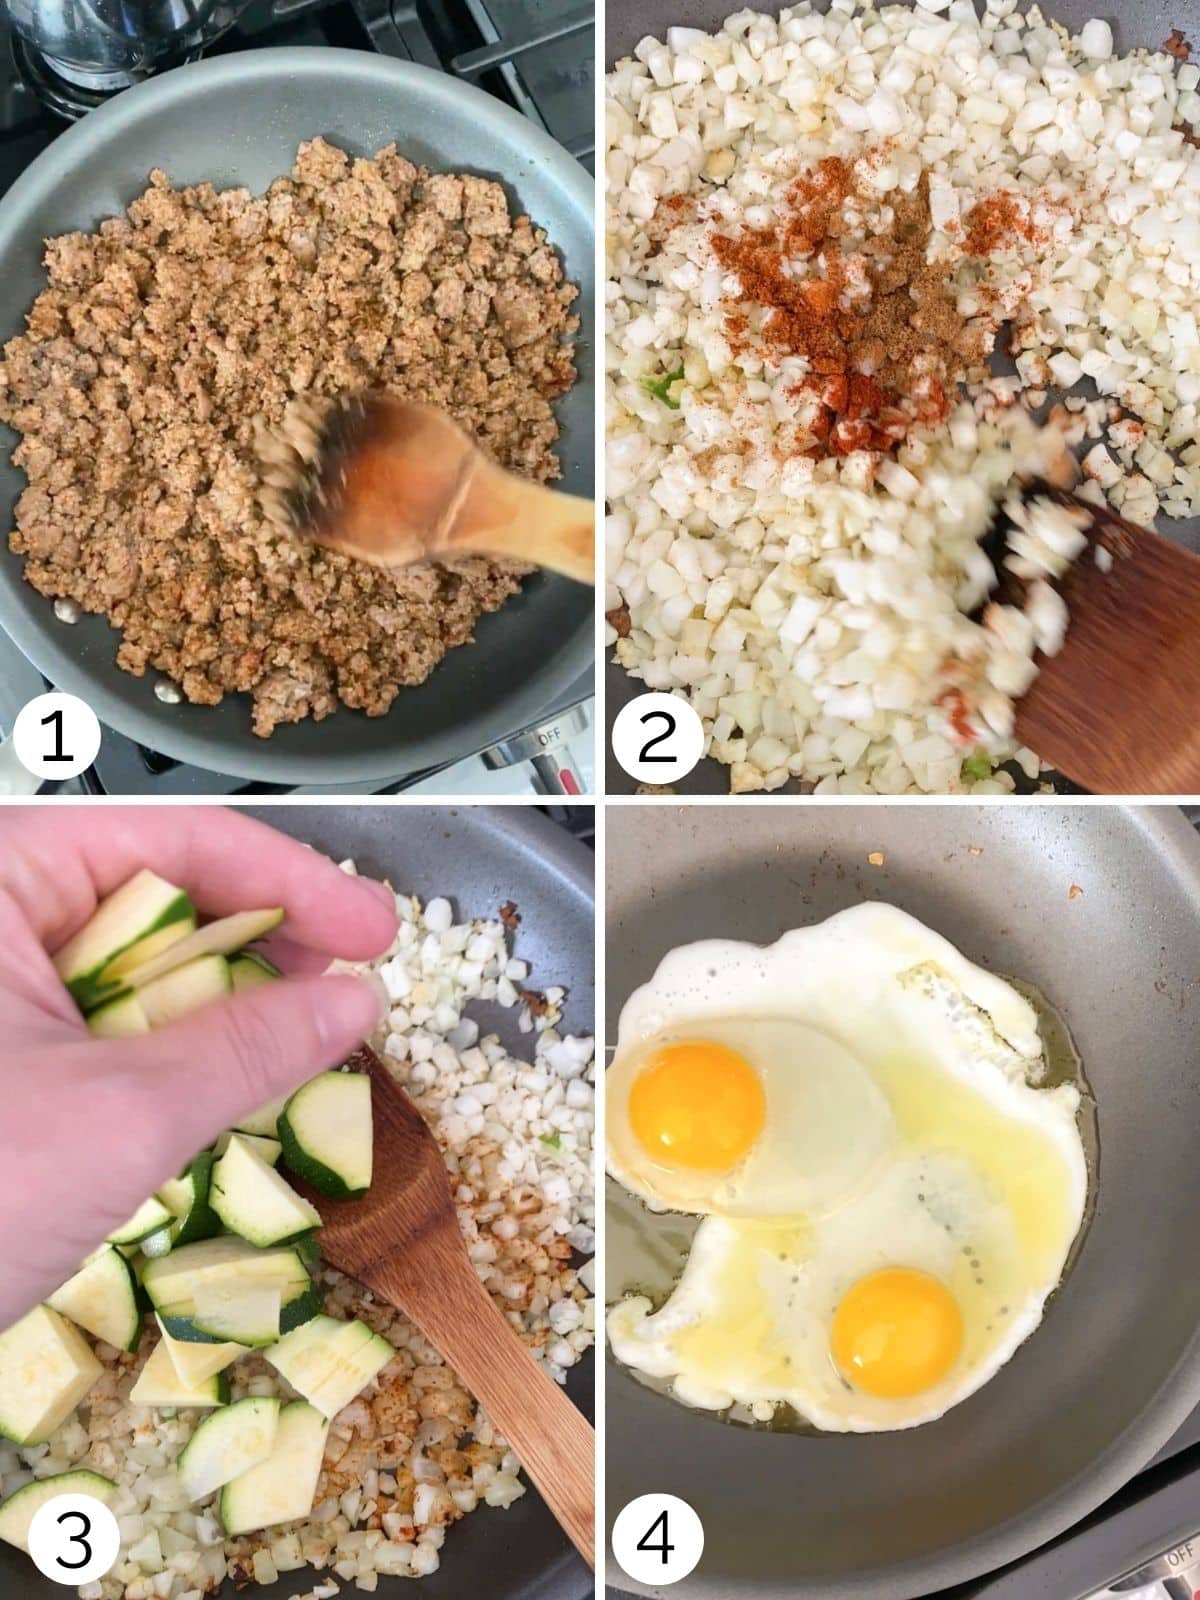 Steps to make a protein bowl.